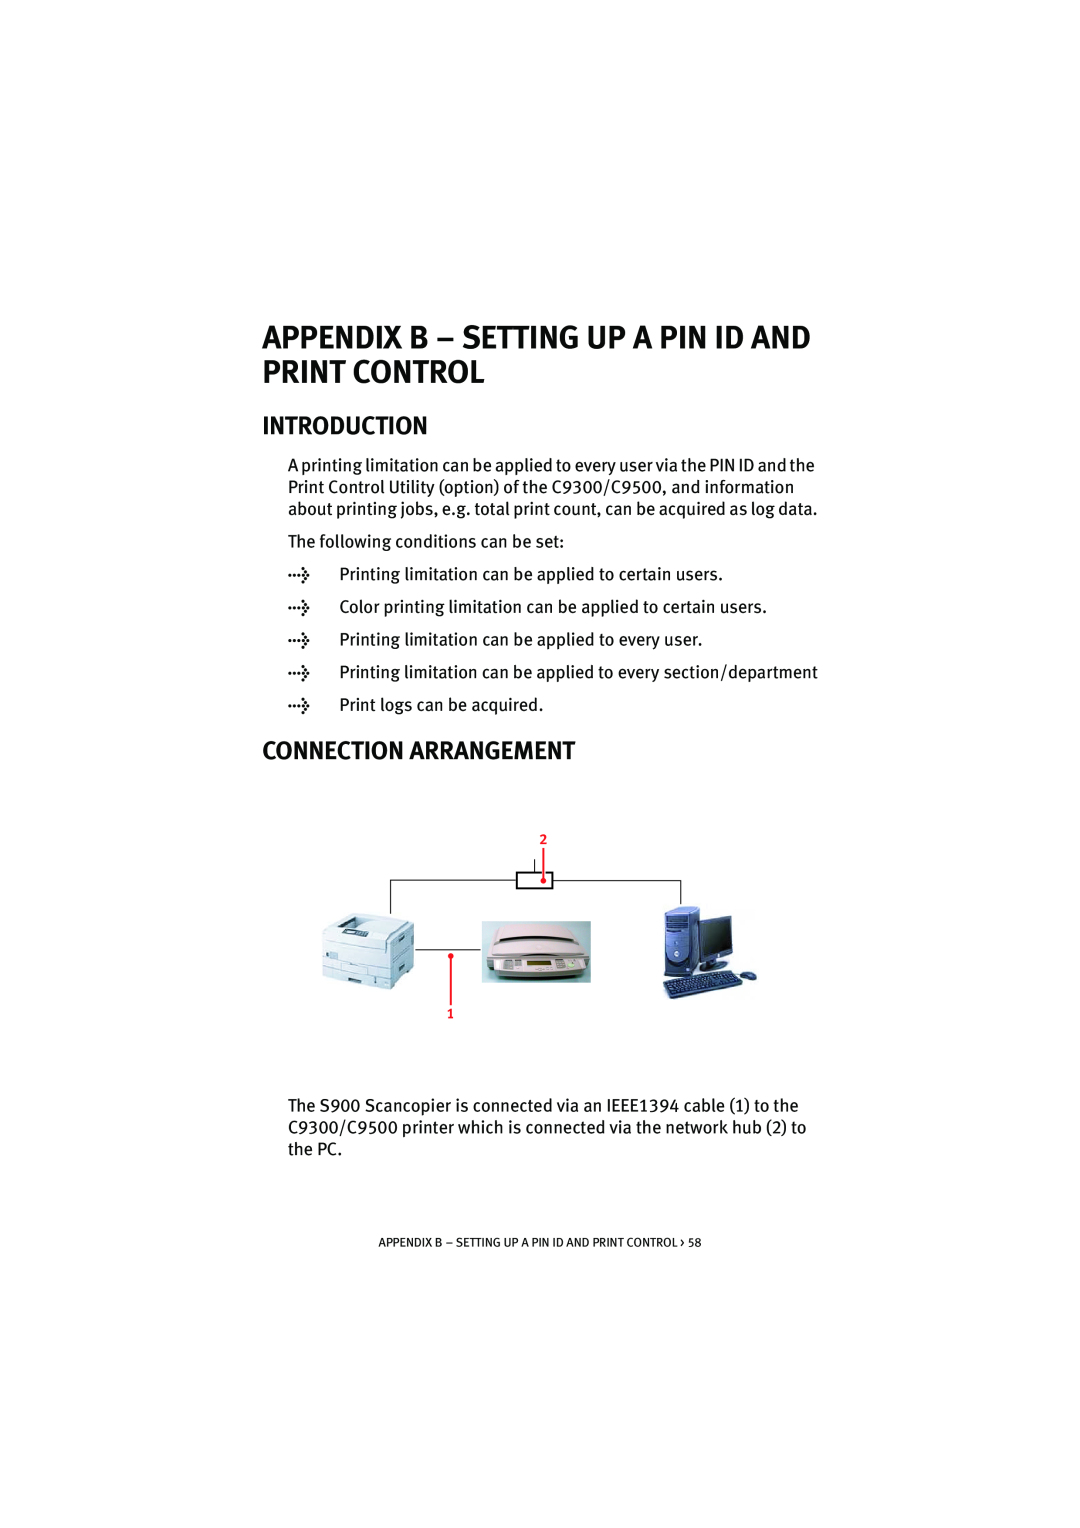 Oki S900 manual Appendix B - Setting Up A Pin Id And Print Control, Introduction, Connection Arrangement 